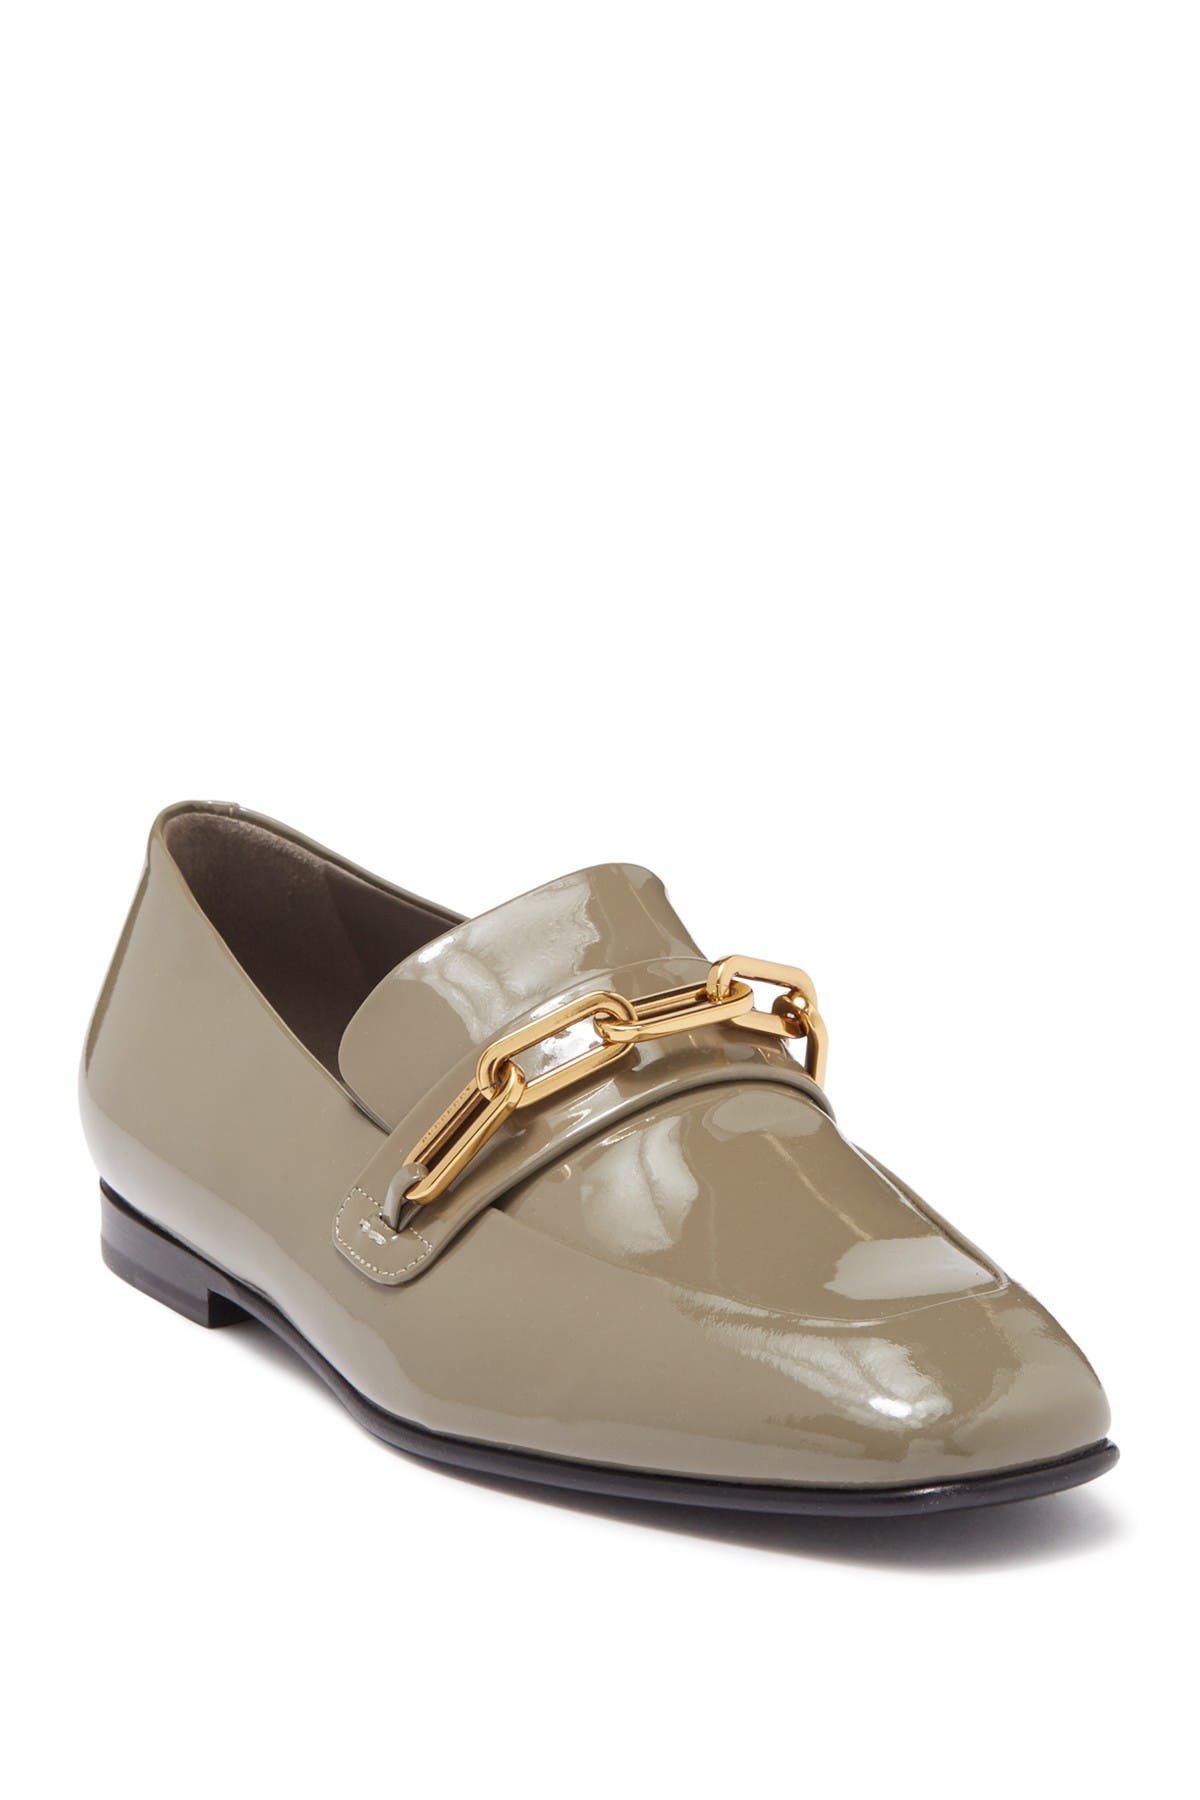 nordstrom rack burberry shoes